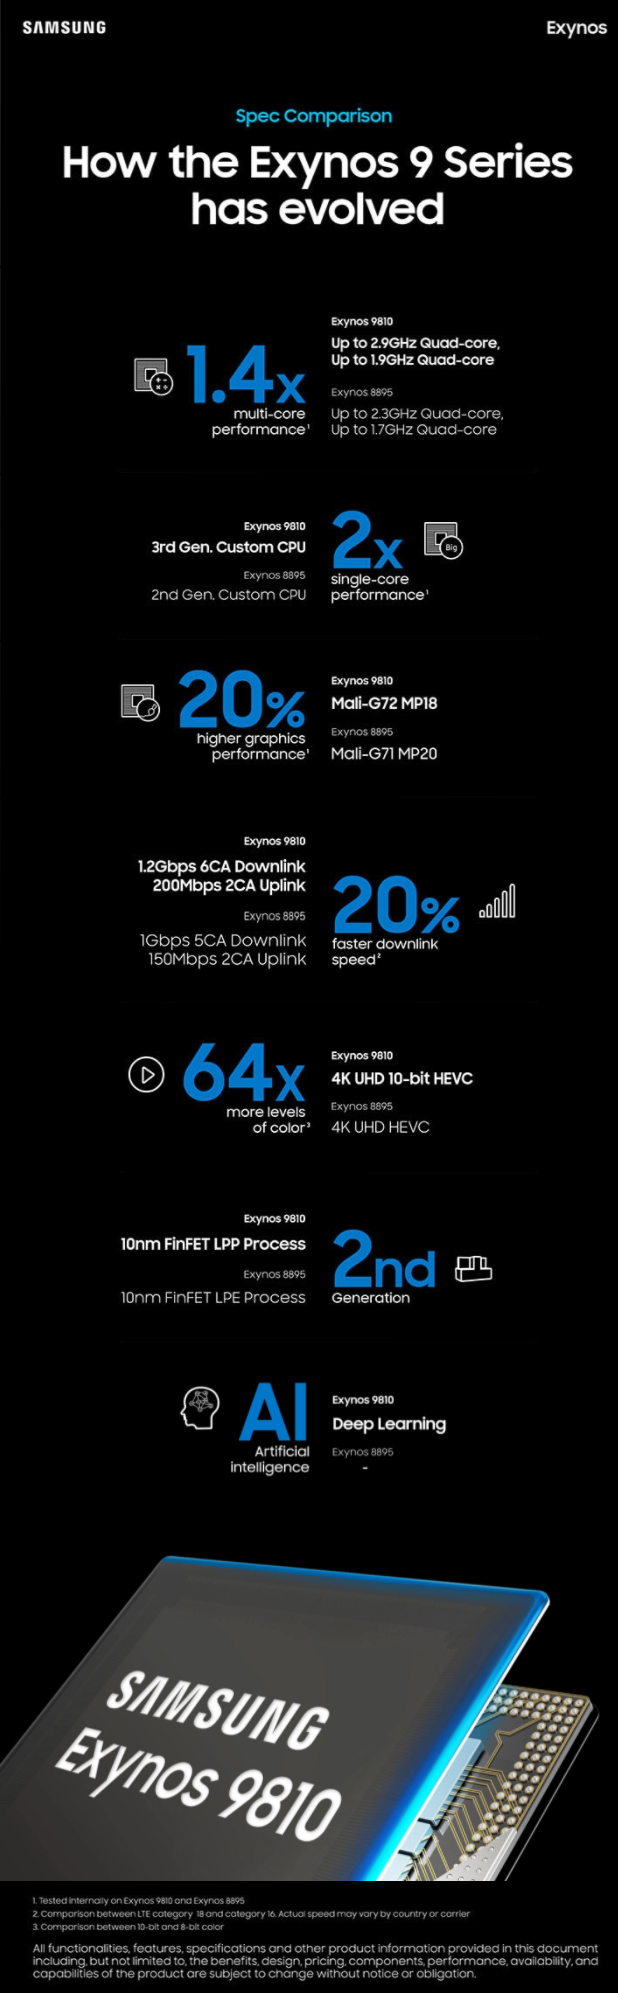 Samsung Exynos 9 Series Specification Comparison Image